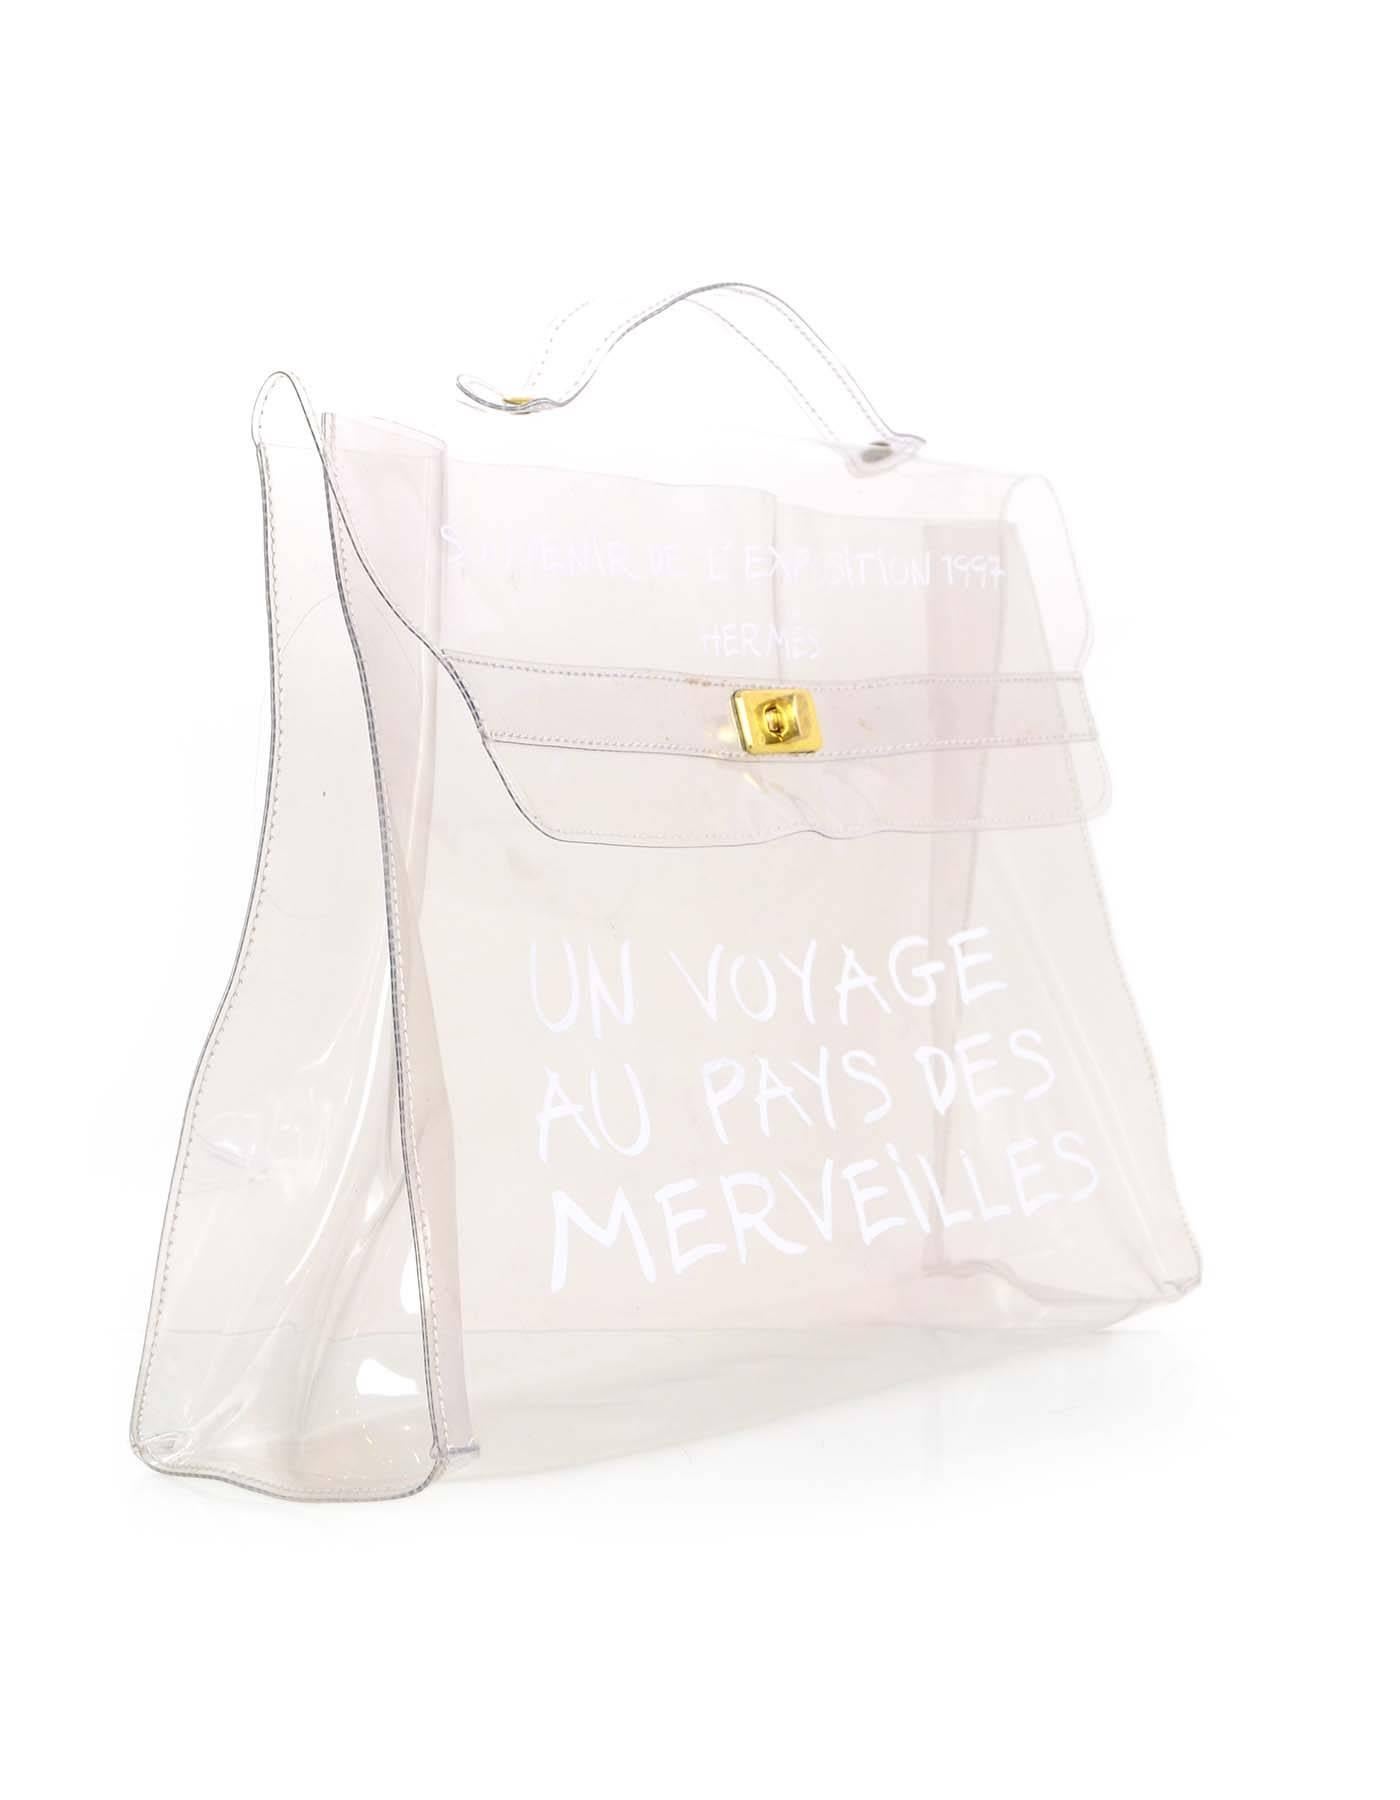 Hermes Clear Plastic Un Voyage Kelly Souvenir Tote
Features white text on front of bag reading: "Souvenir De L'Exposition 1997 Hermes Un Voyage Au Pays Des Merveilles"

Made in: France
Year of Production: 1997
Color: Clear, white and